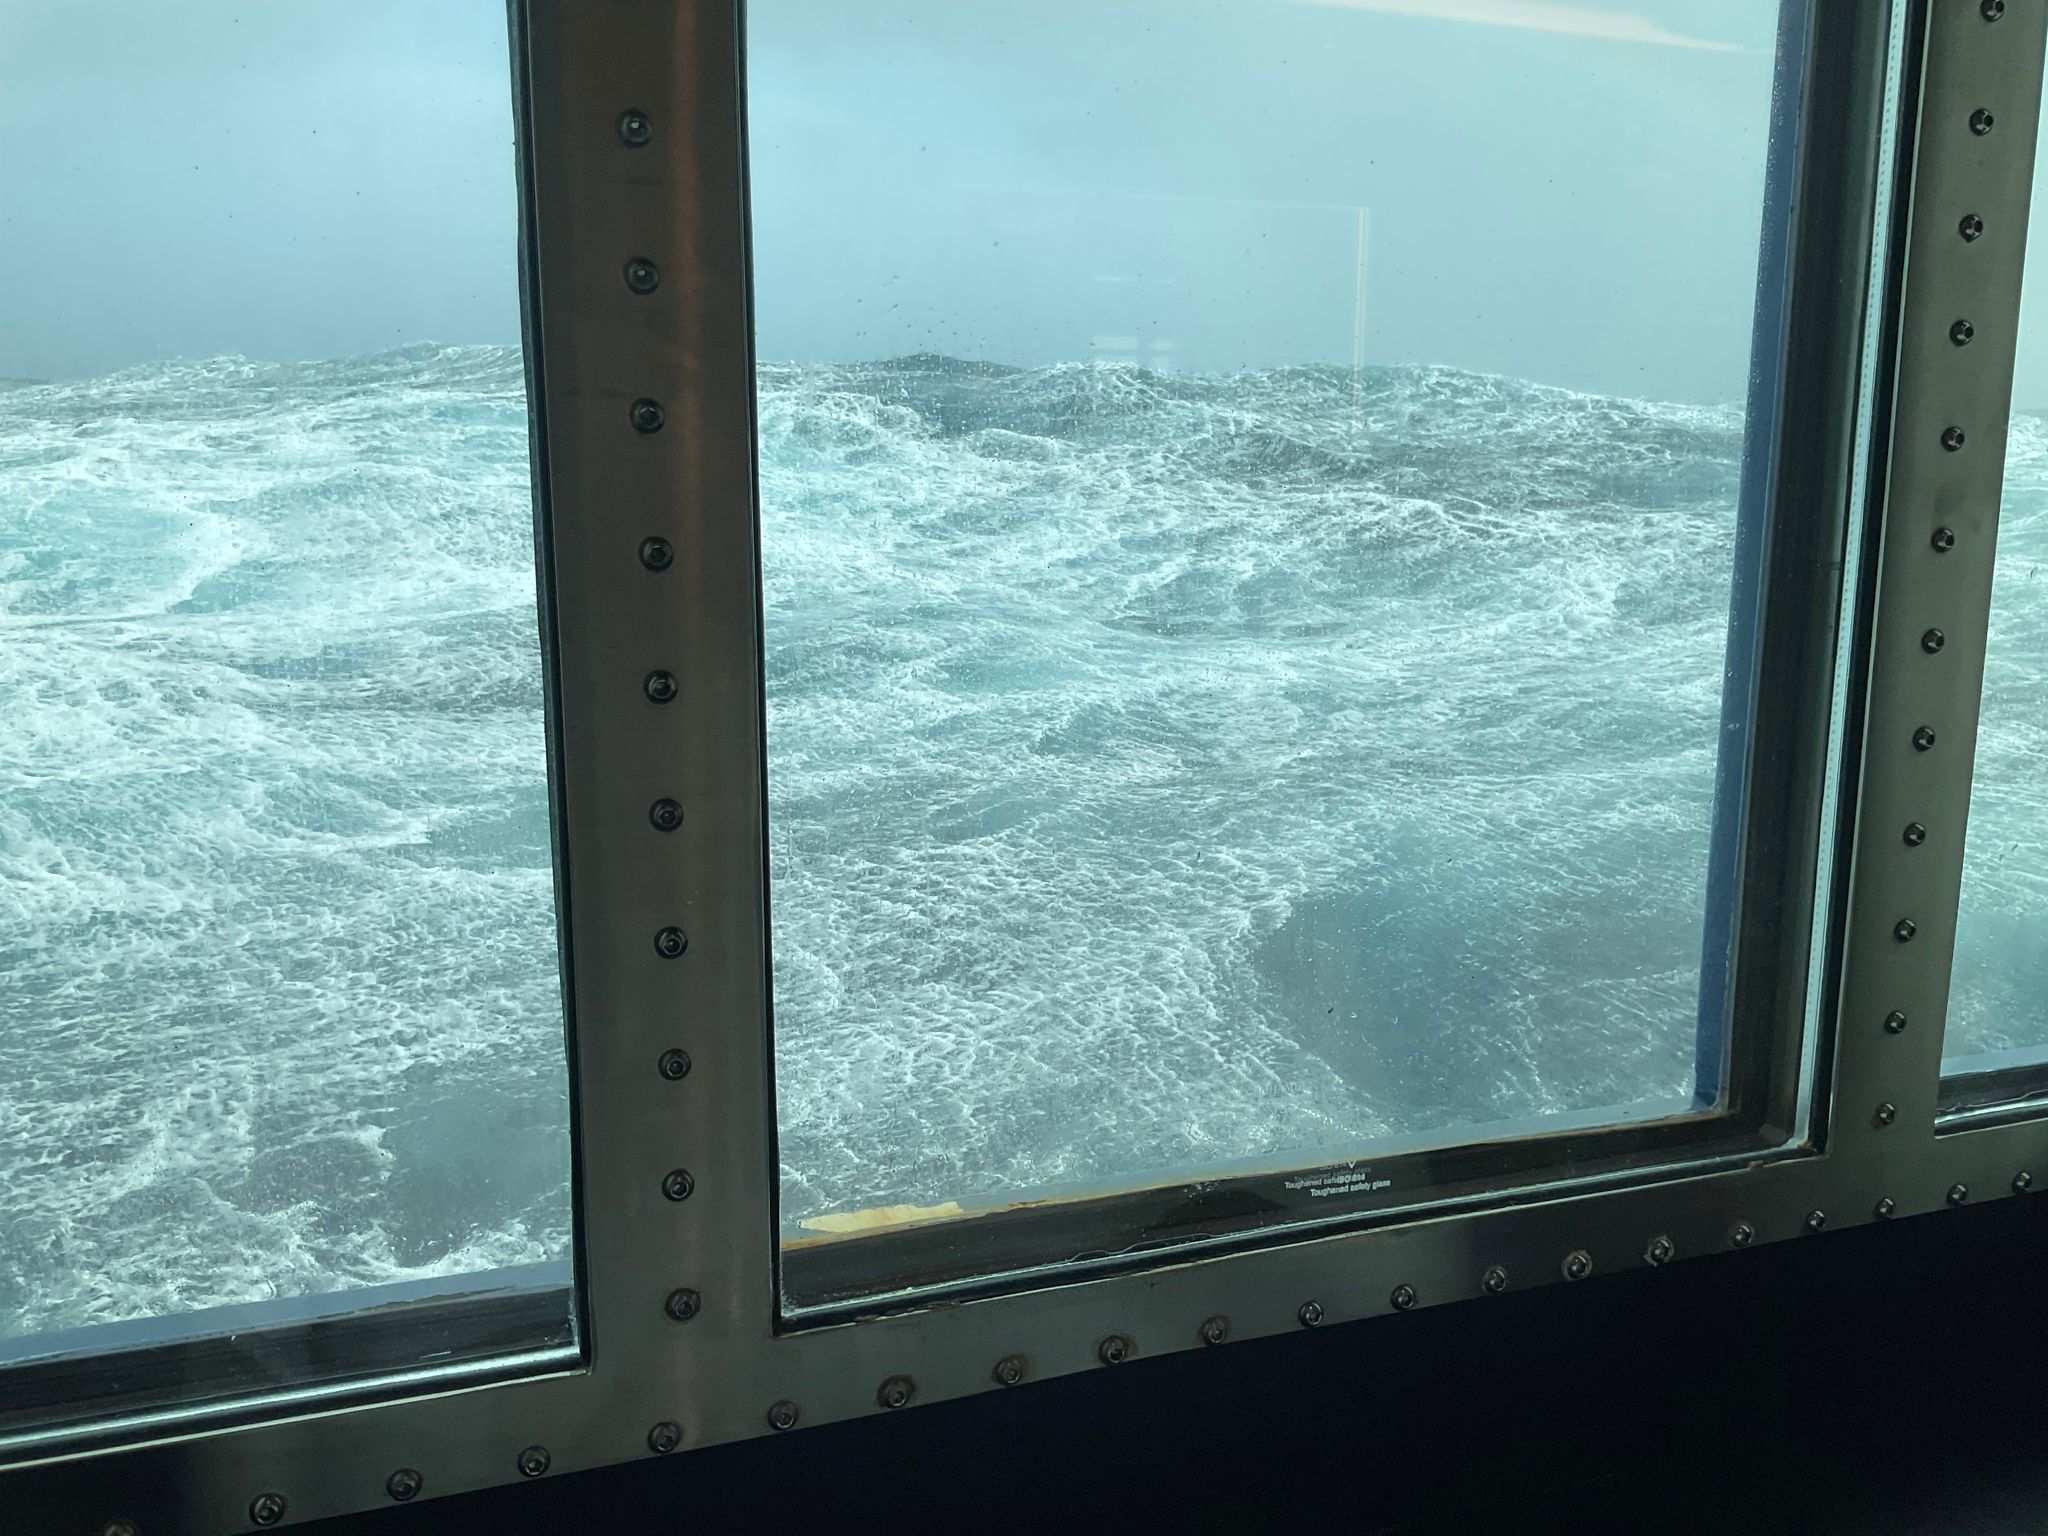 Saga’s cruise ship ran into trouble in gale force winds and was hit by waves as high as 30ft